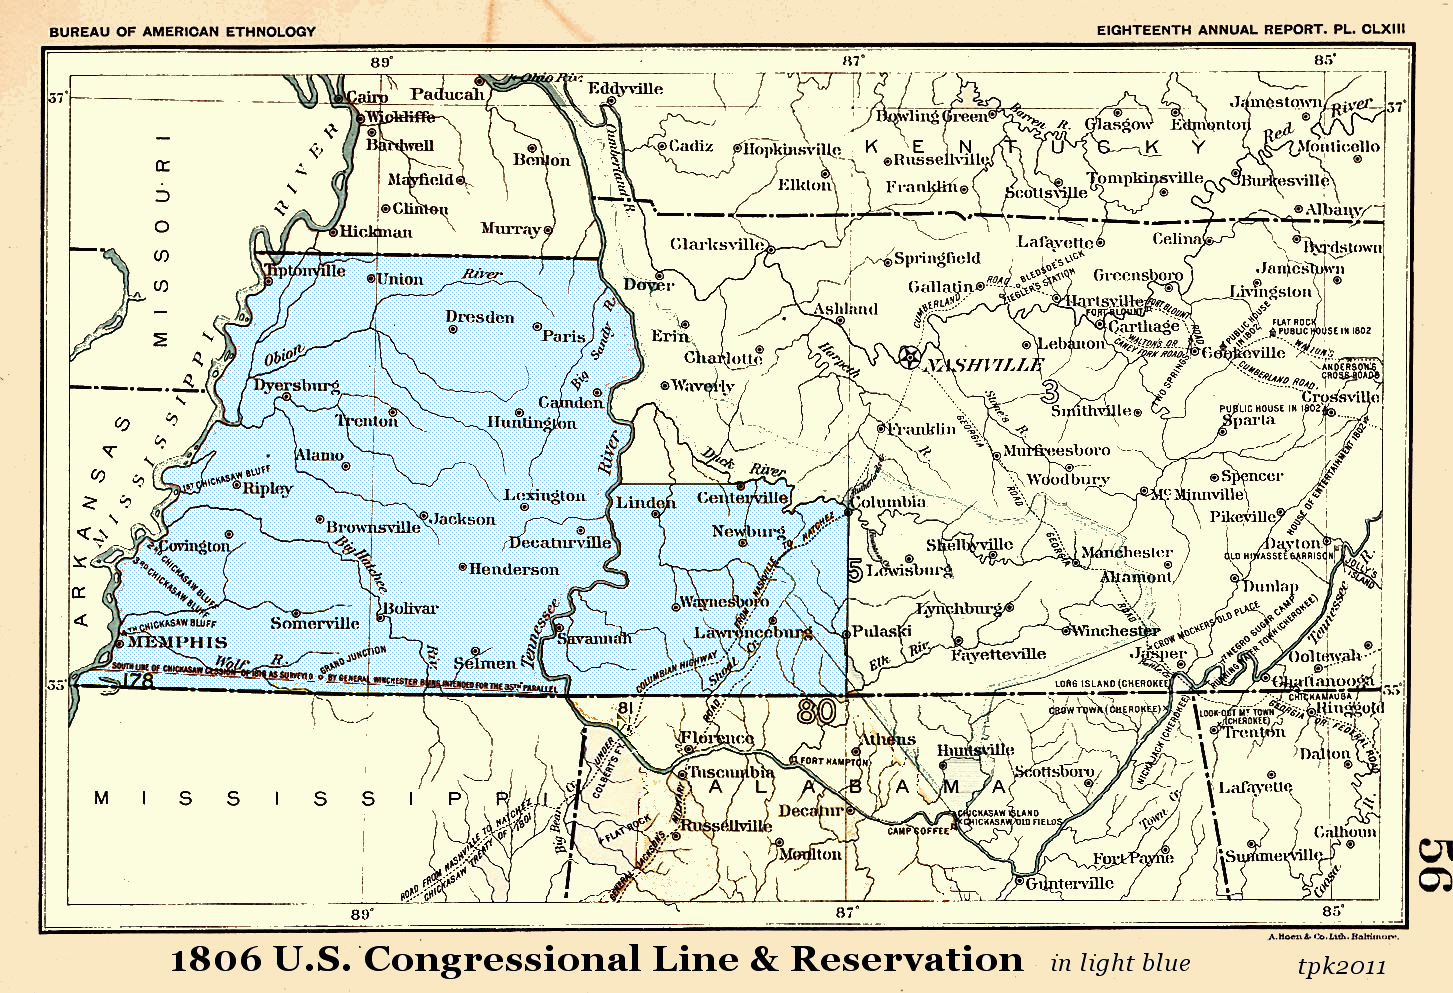 1806 US Congressional Reservation of West Tennessee and lower Middle Tennessee